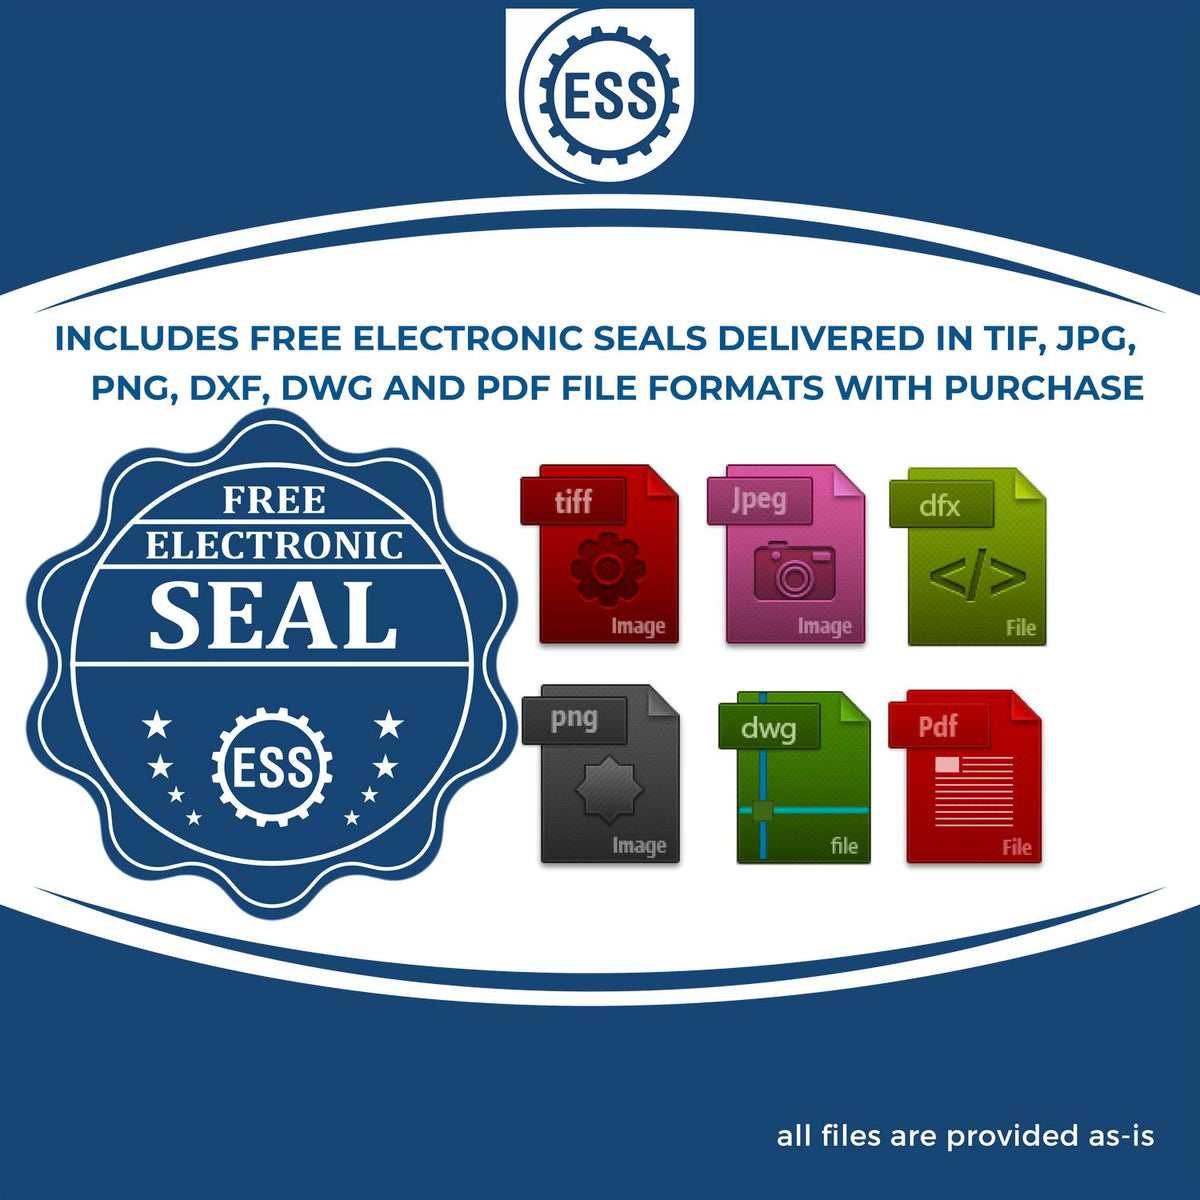 An infographic for the free electronic seal for the Hybrid Arizona Architect Seal illustrating the different file type icons such as DXF, DWG, TIF, JPG and PNG.